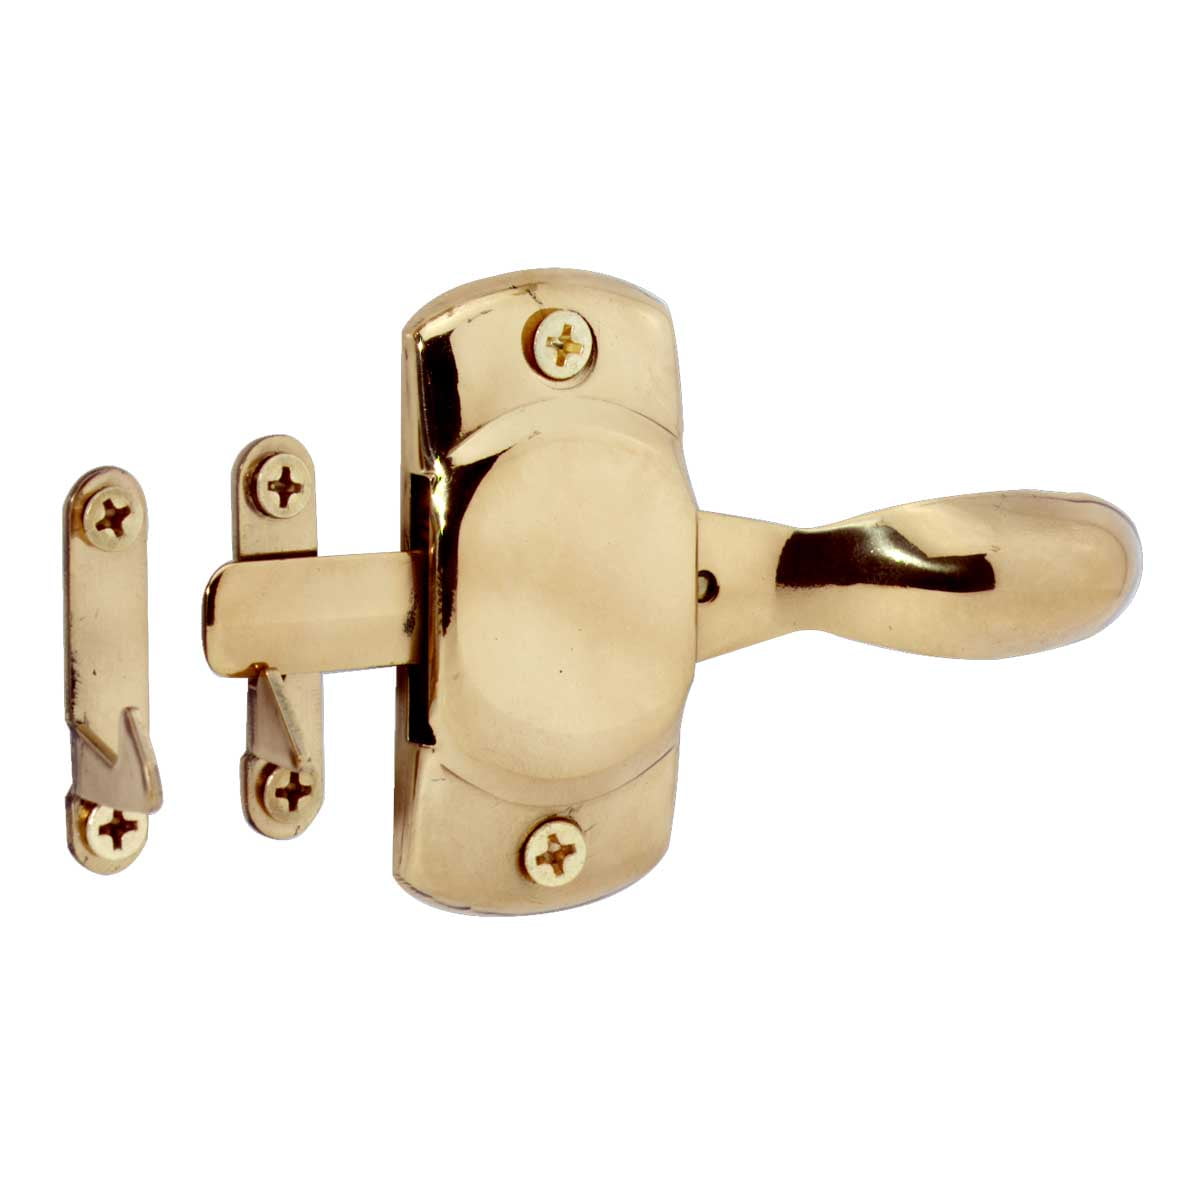 Cabinet Latch with Antique Brass Finish 